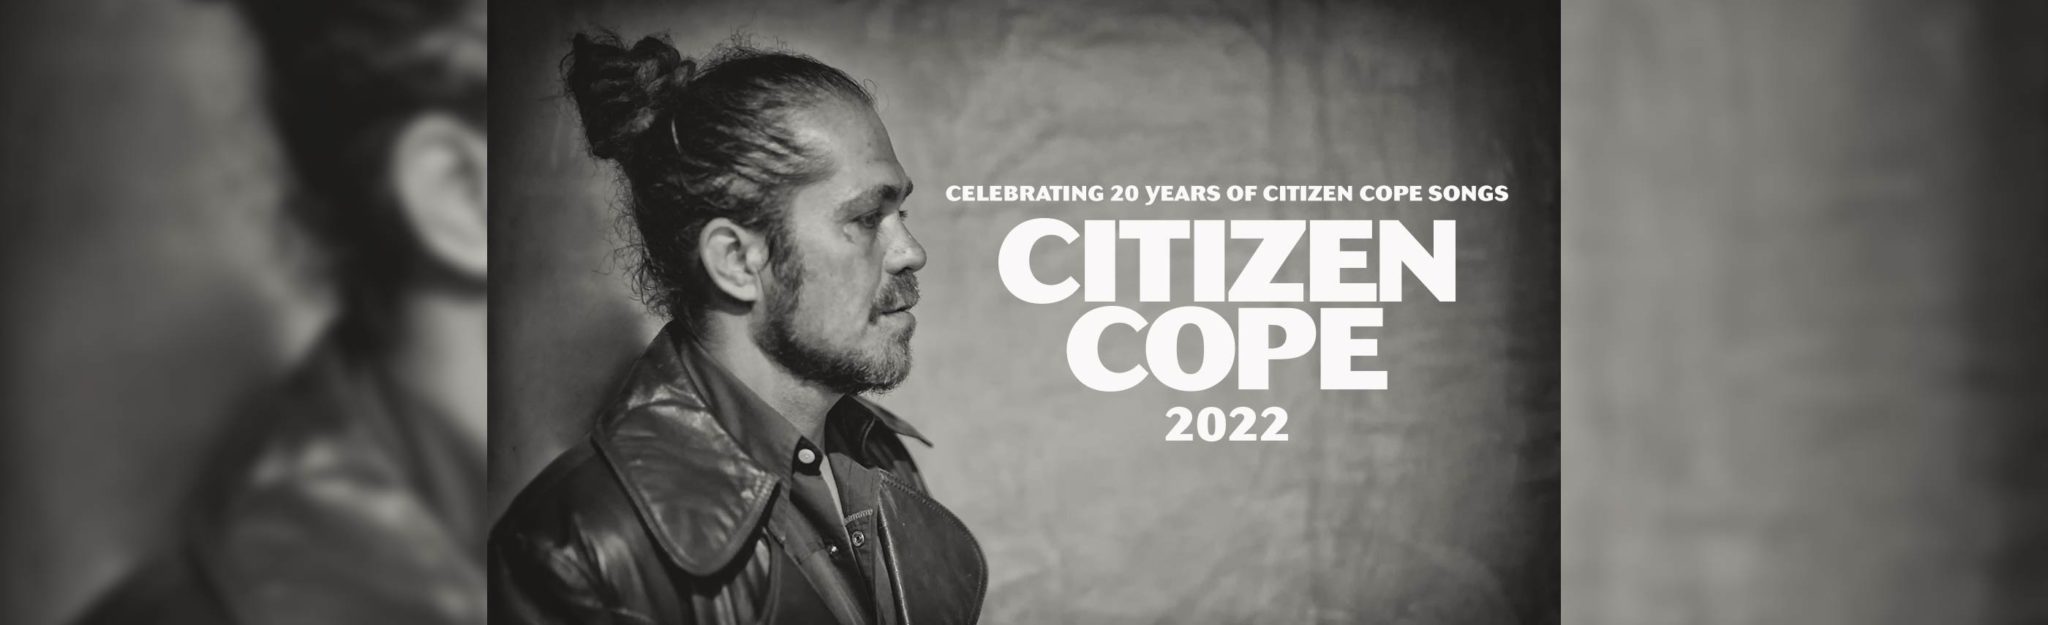 Citizen Cope for a live concert performance at The Wilma on Friday, May 20